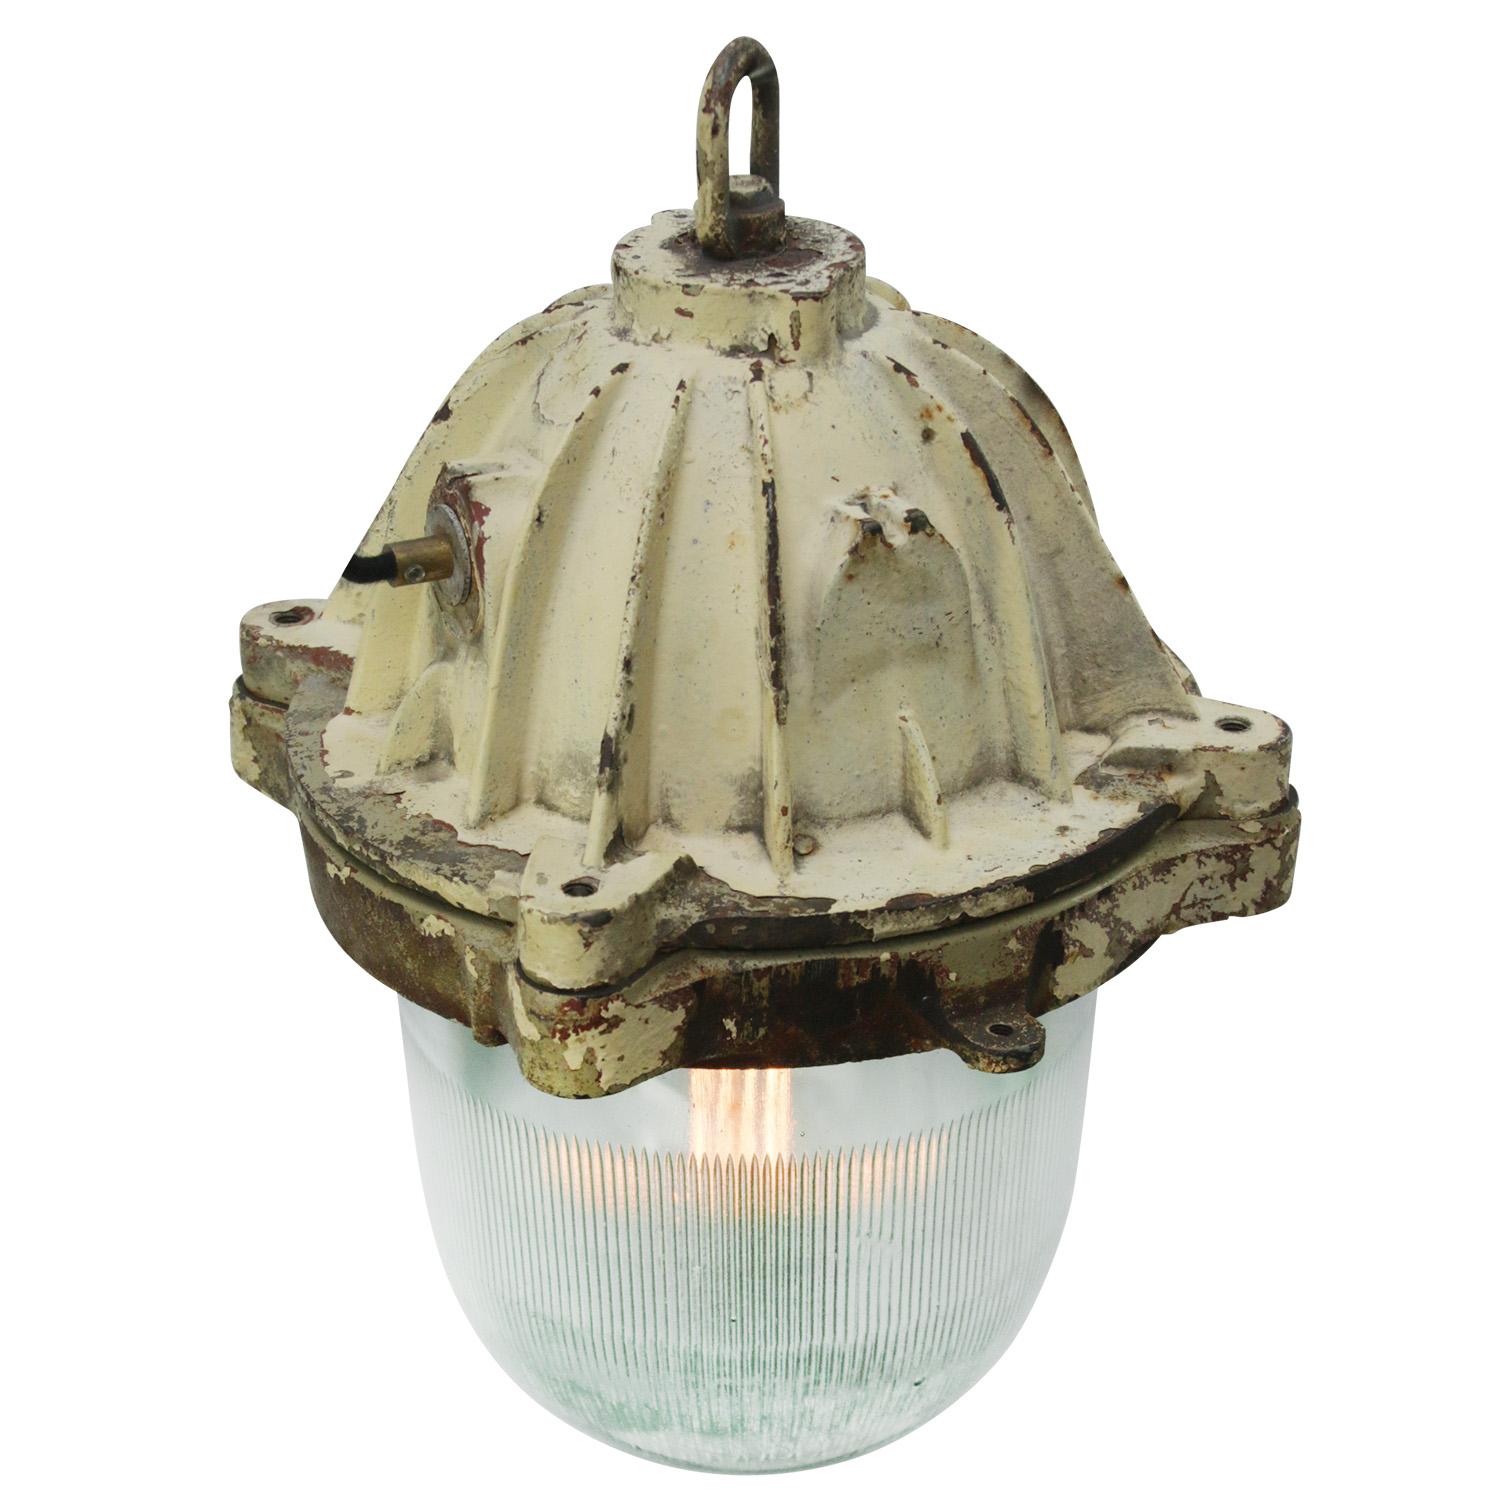 Extra large French industrial hanging lamp by Mapelec Amiens.
Brown cast iron.
Clear striped glass.

Weight: 21.70 kg / 47.8 lb.

Priced per individual item. All lamps have been made suitable by international standards for incandescent light